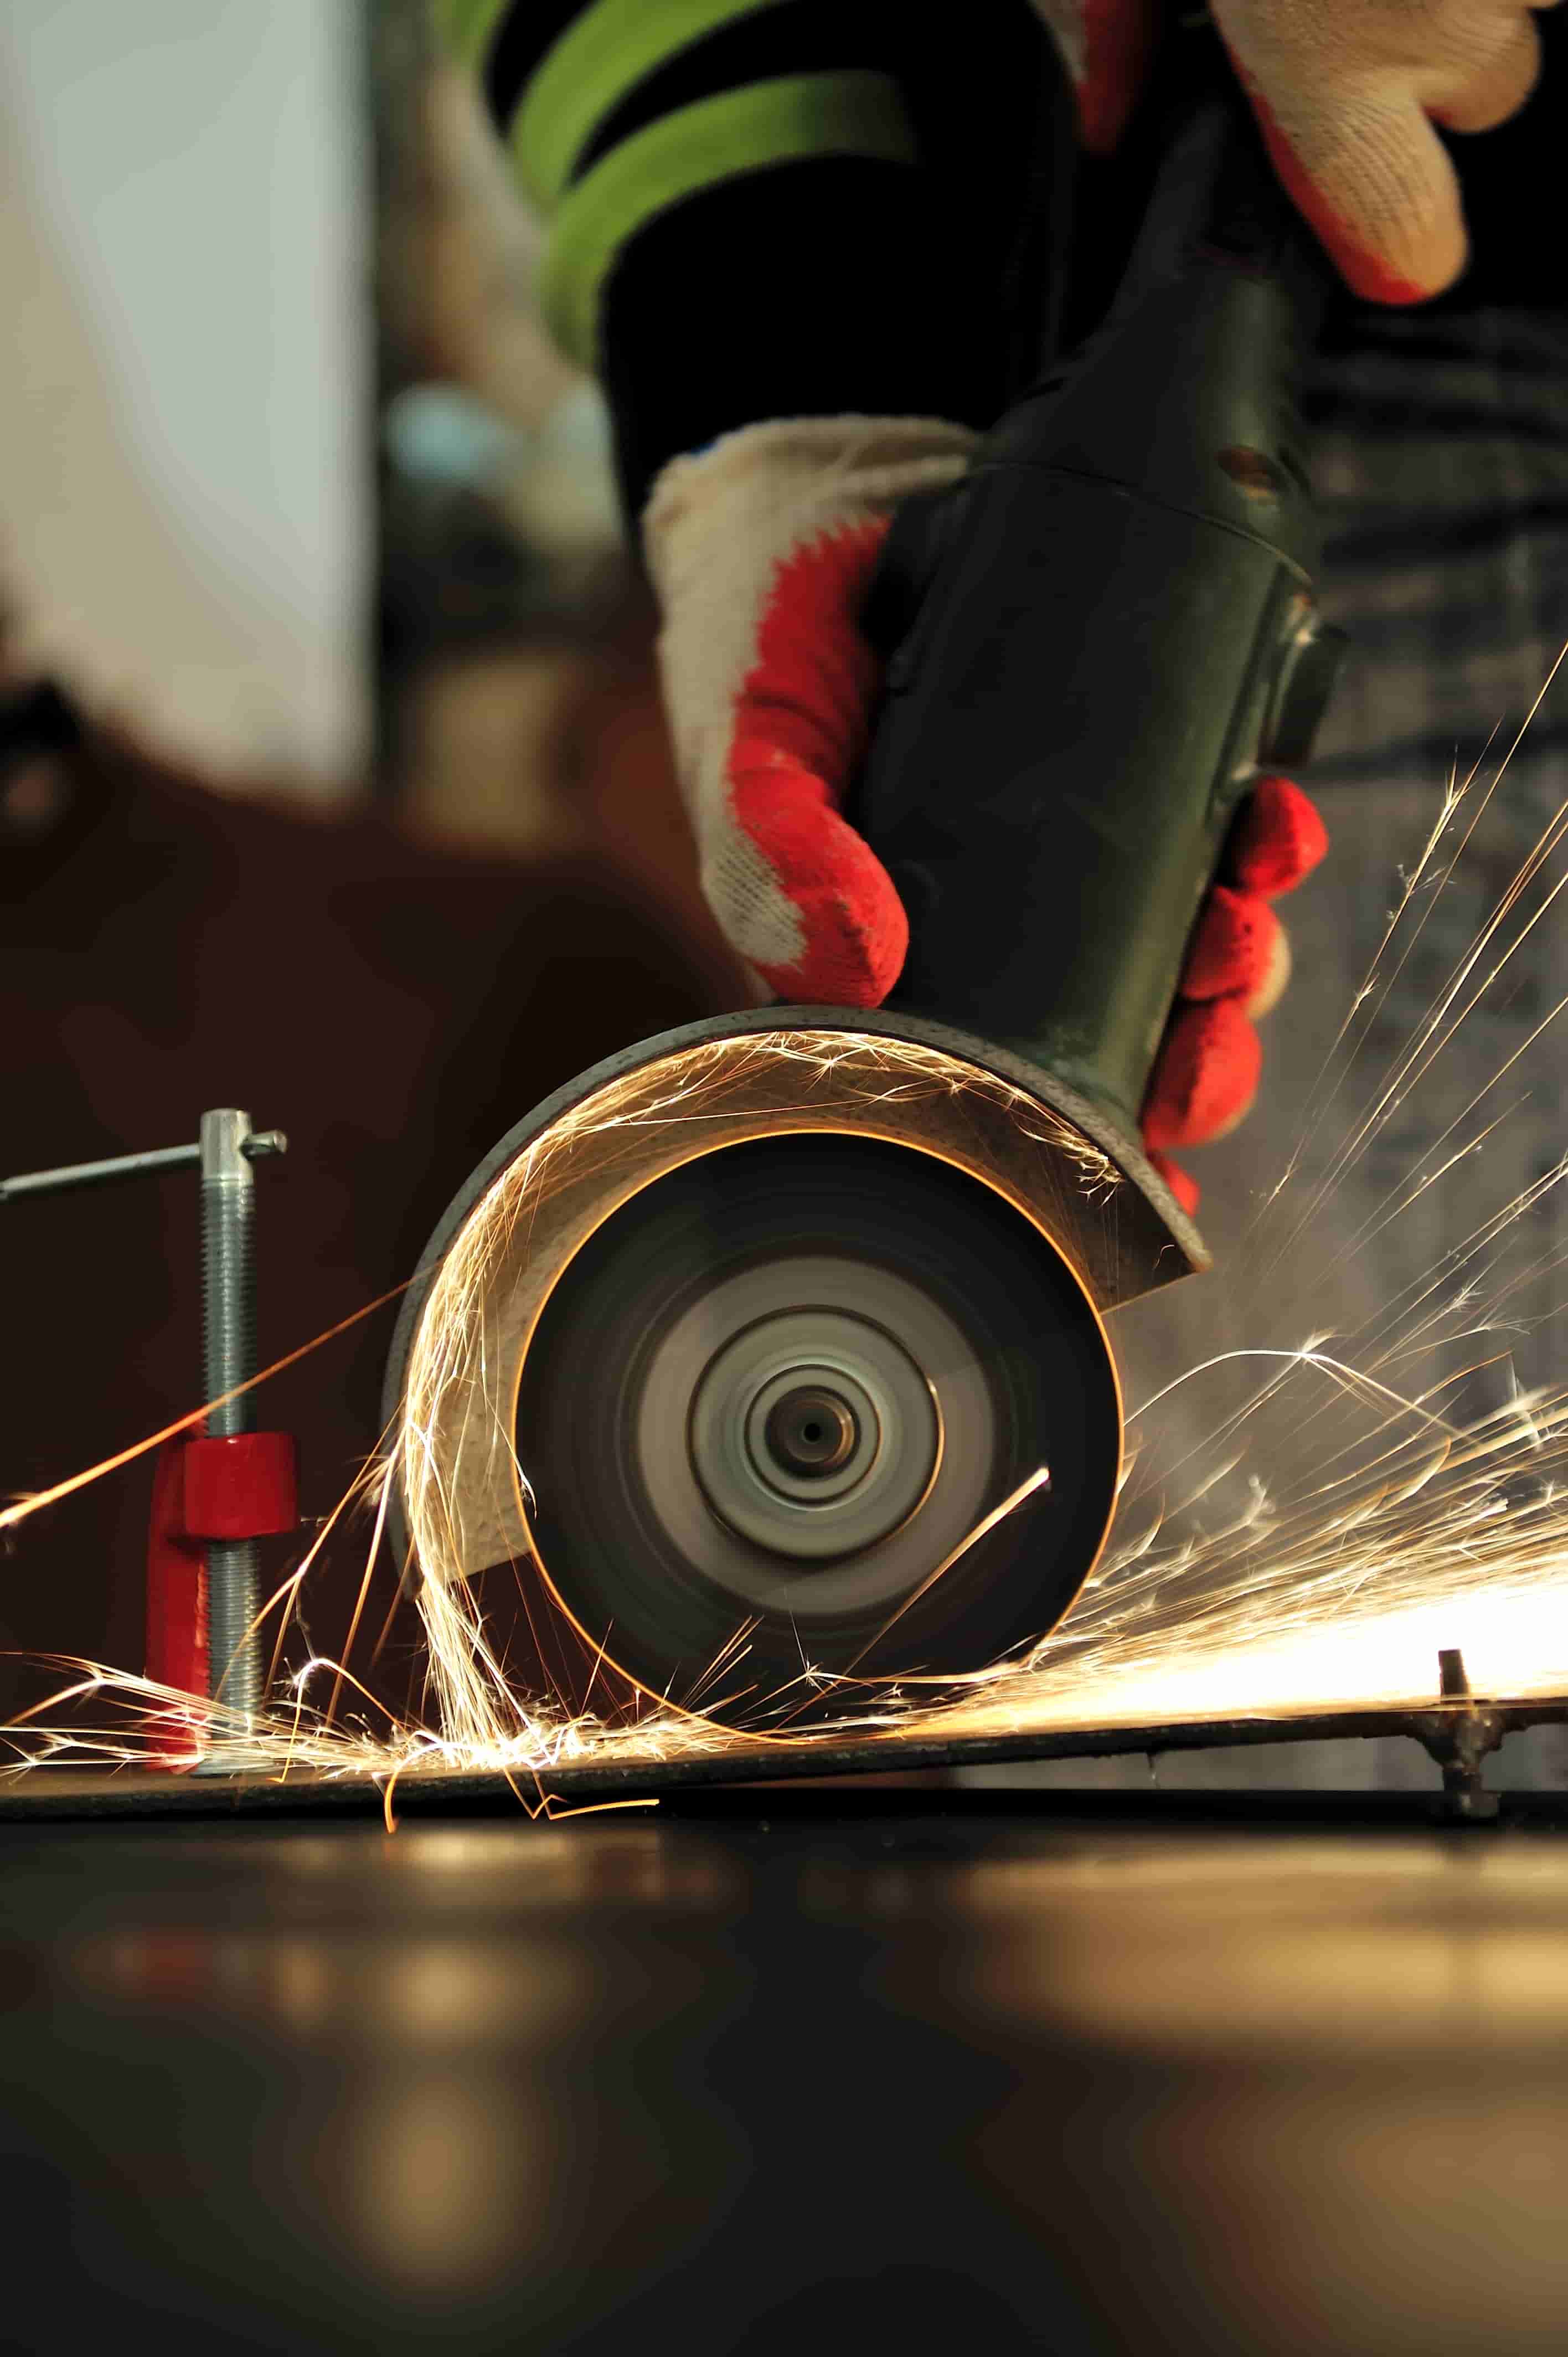 Understanding Power Tools: What Are They and How Do Bearings Impact Their Performance?